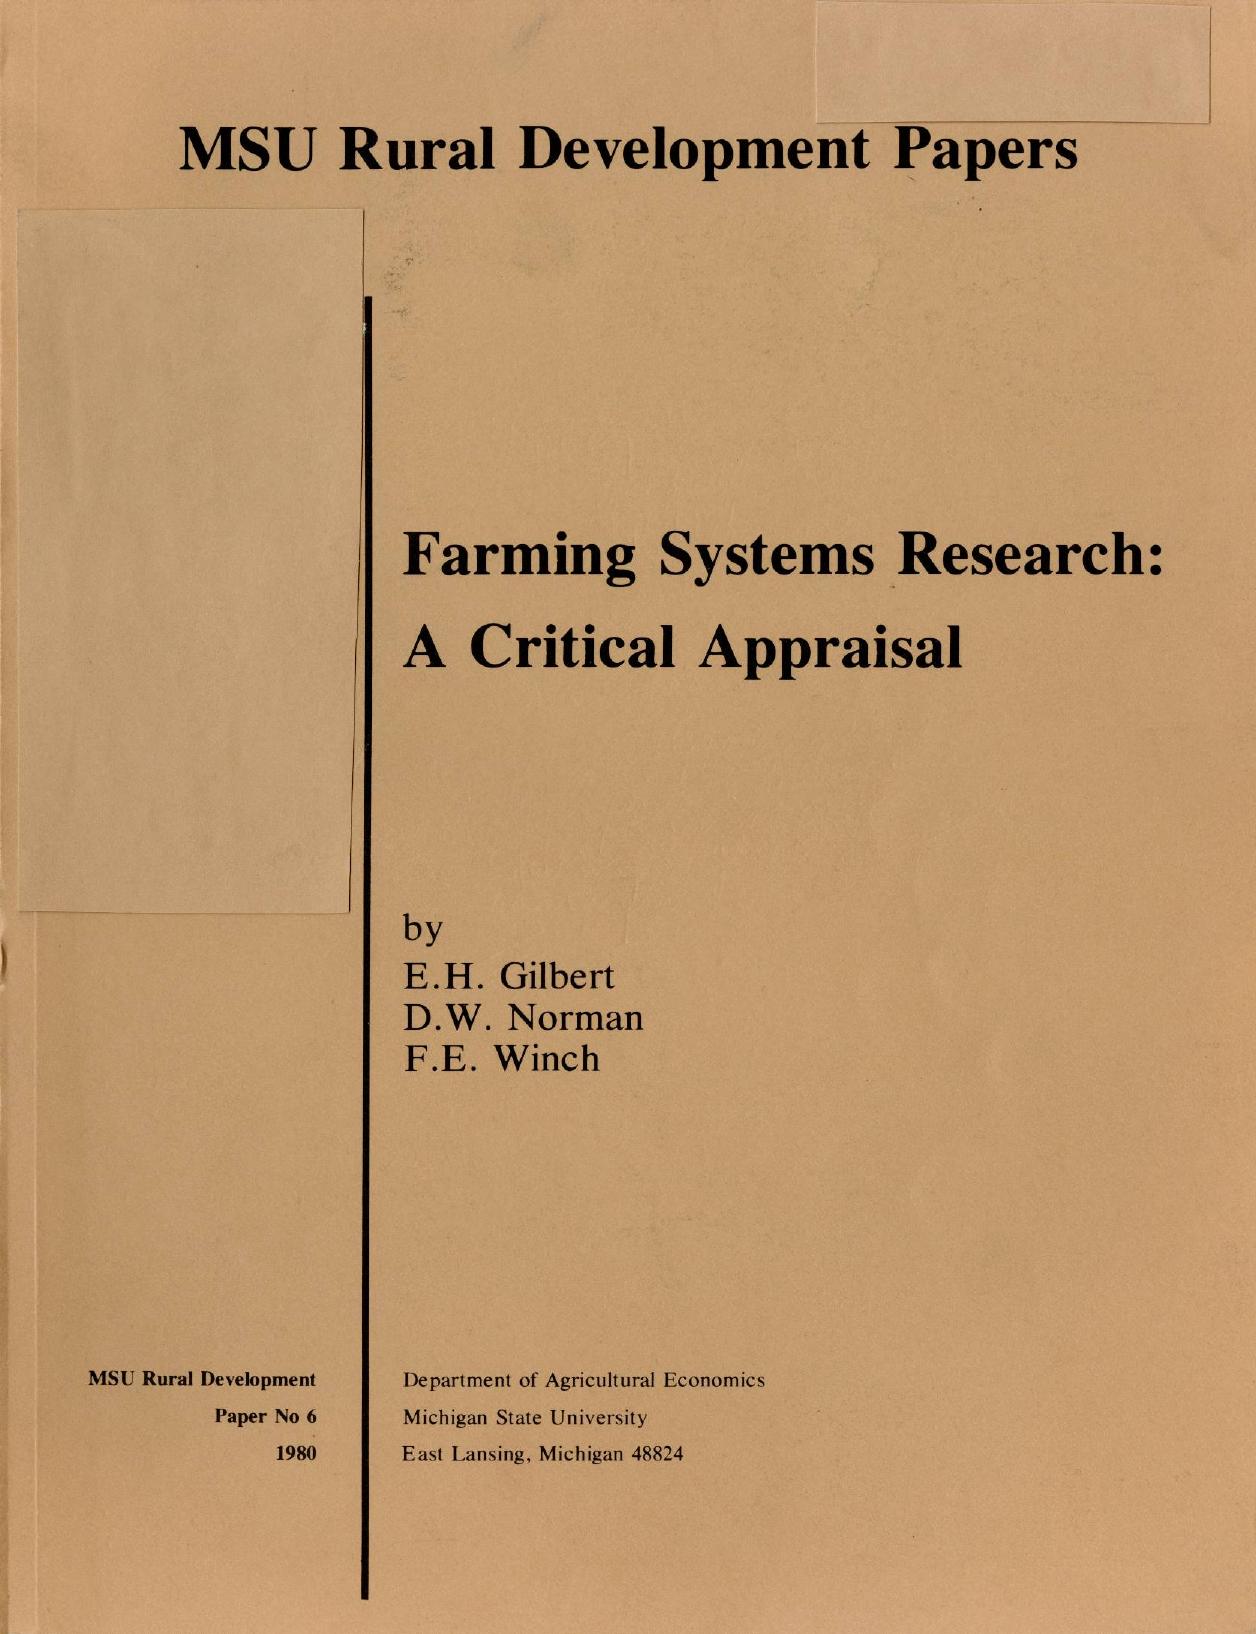 Farming Systems Research